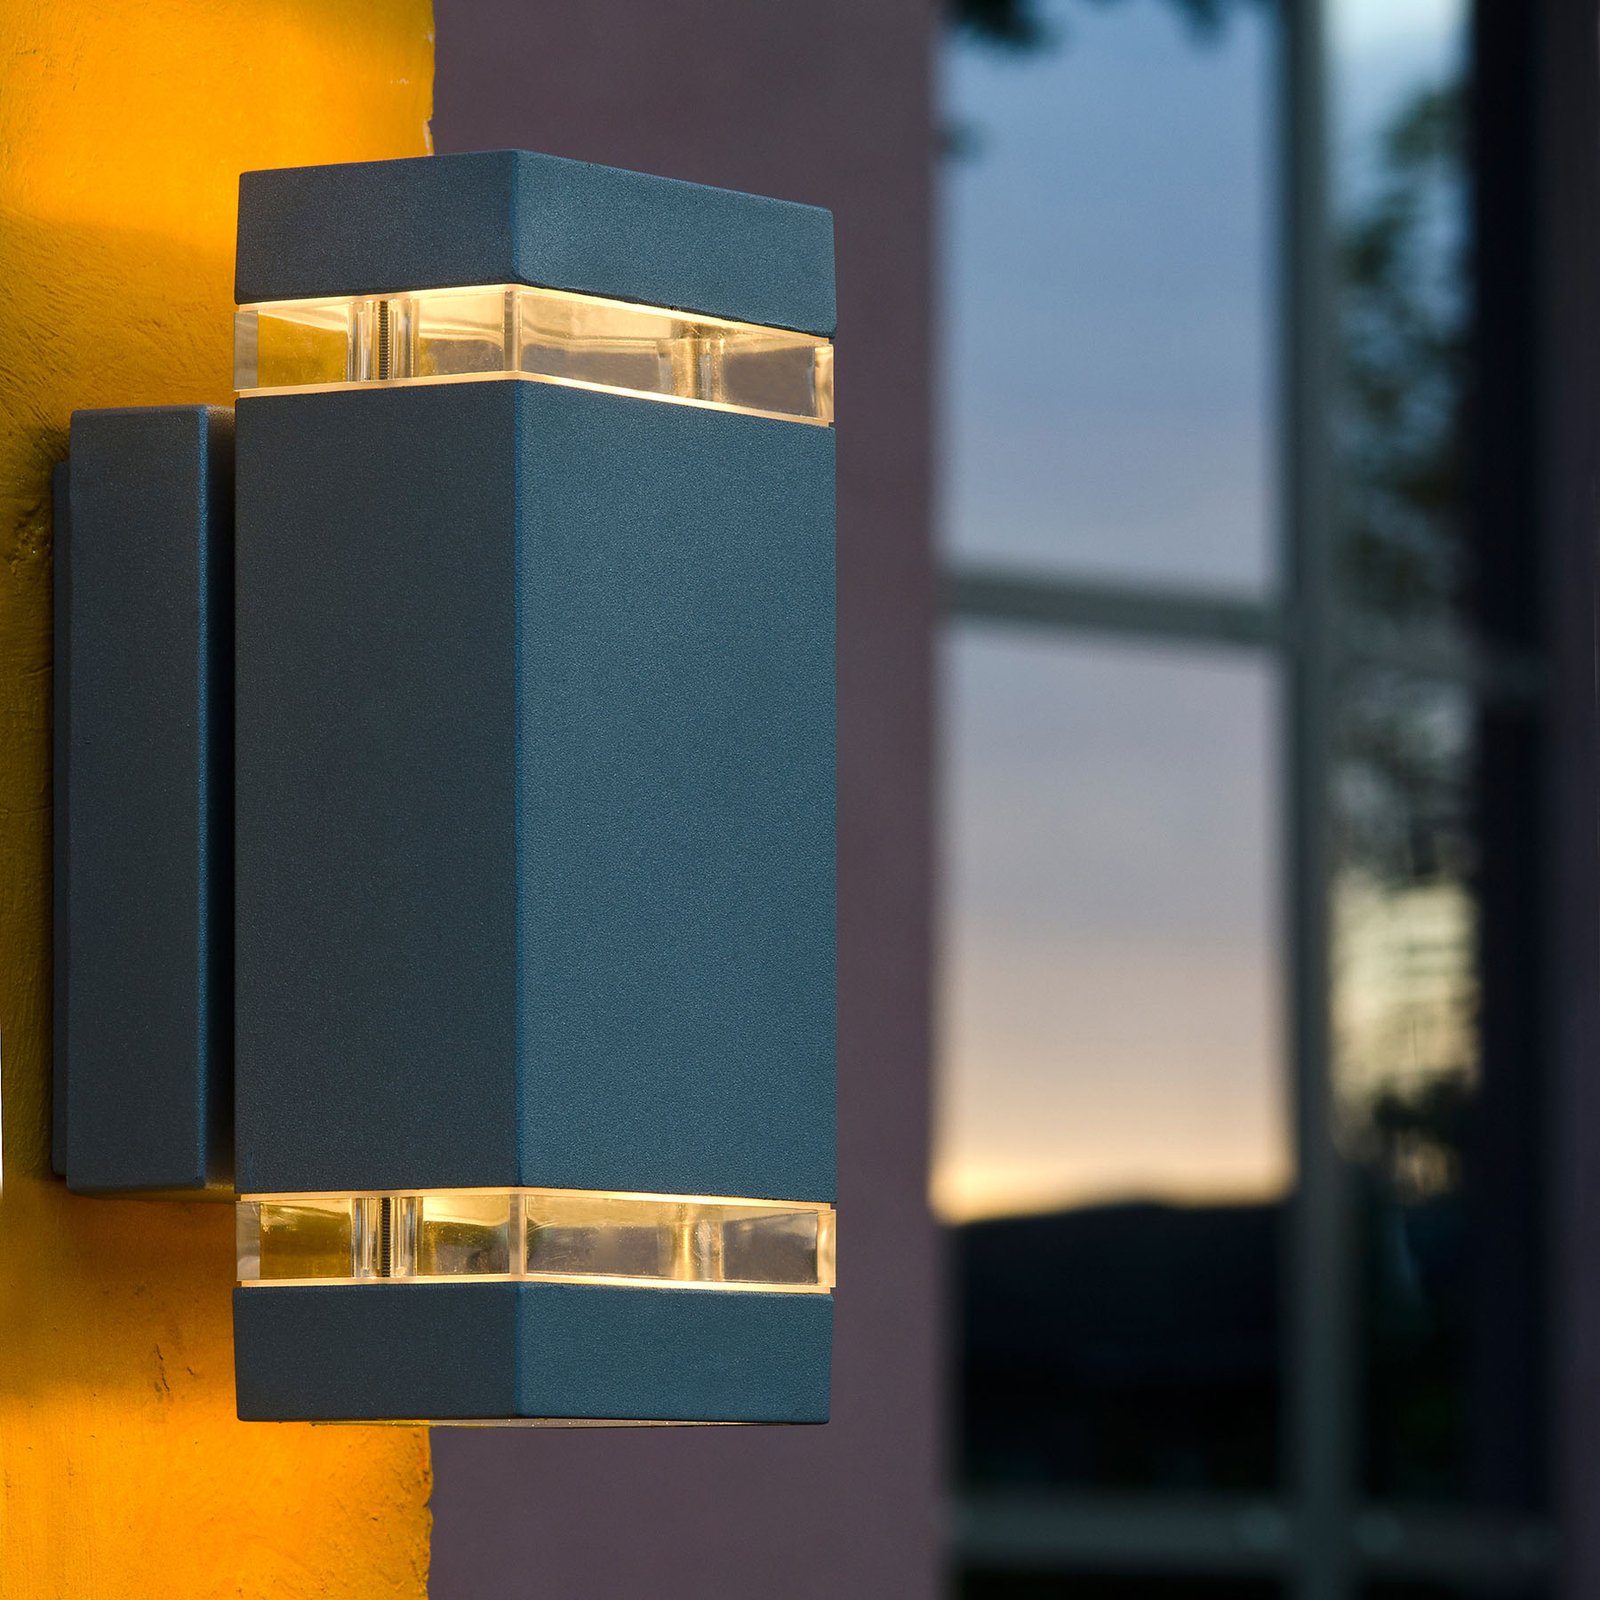 Focus outdoor wall light, anthracite